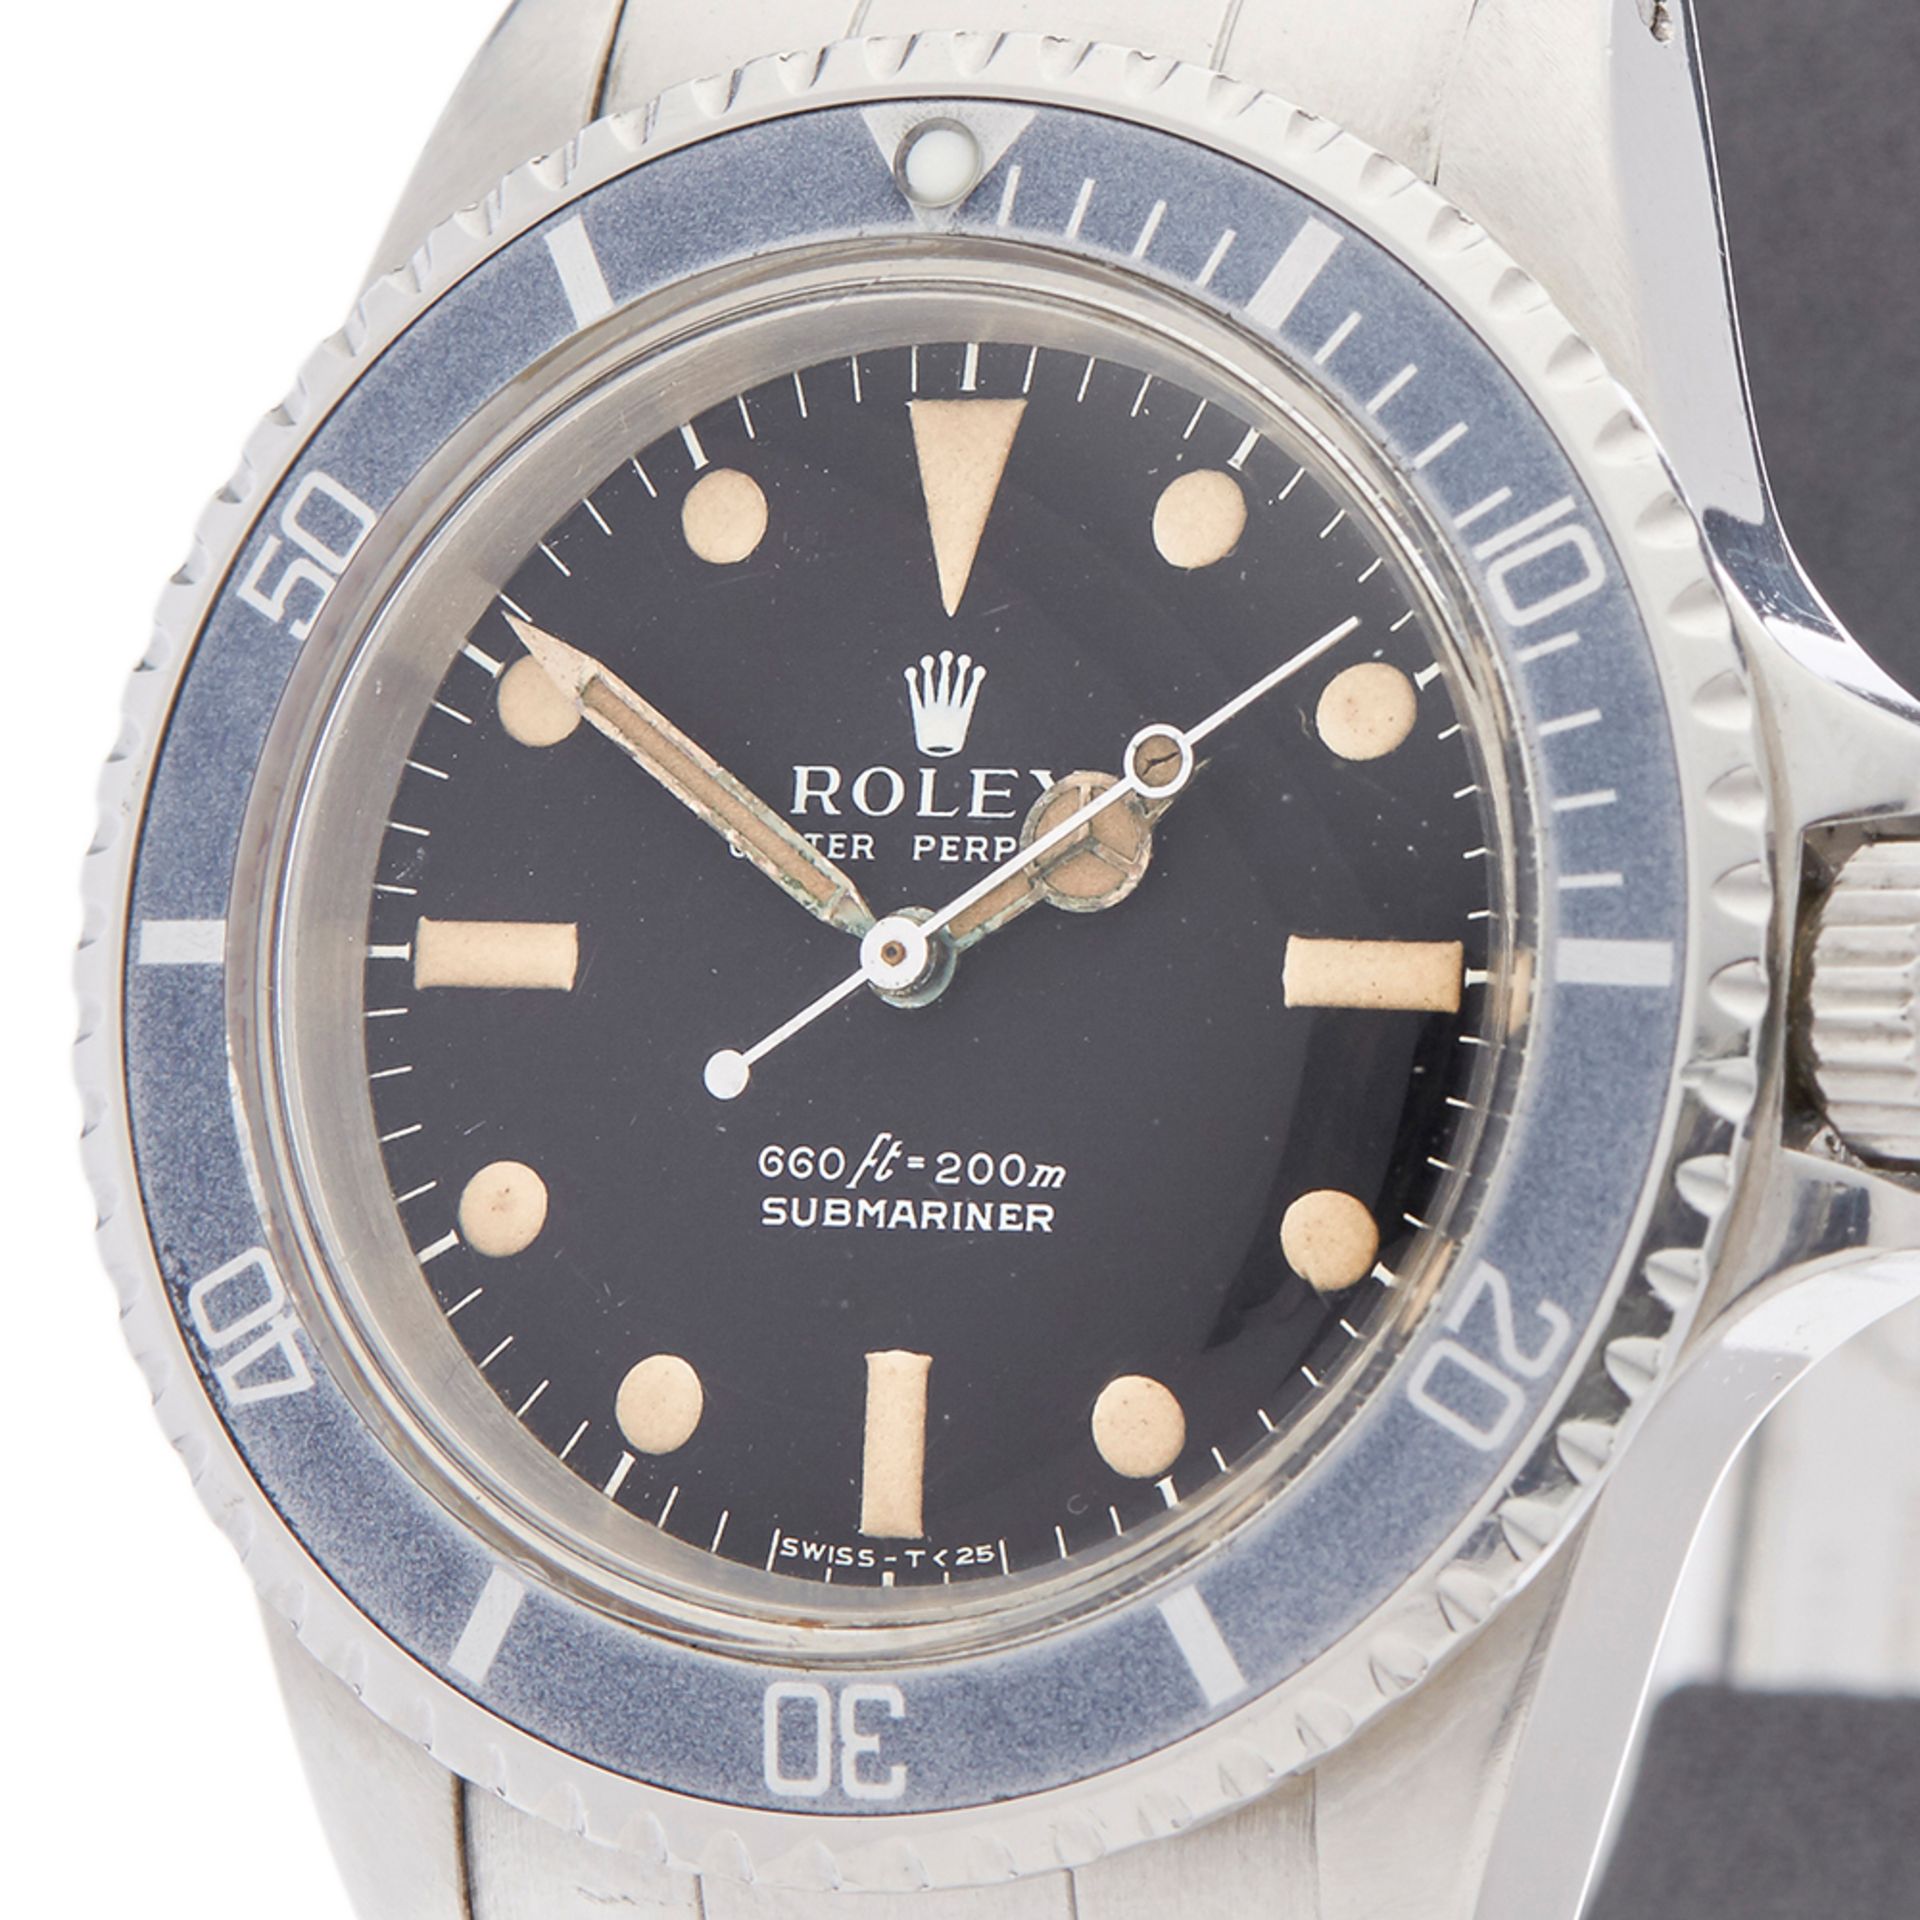 Rolex Submariner Serif Dial 40mm Stainless Steel - 5513